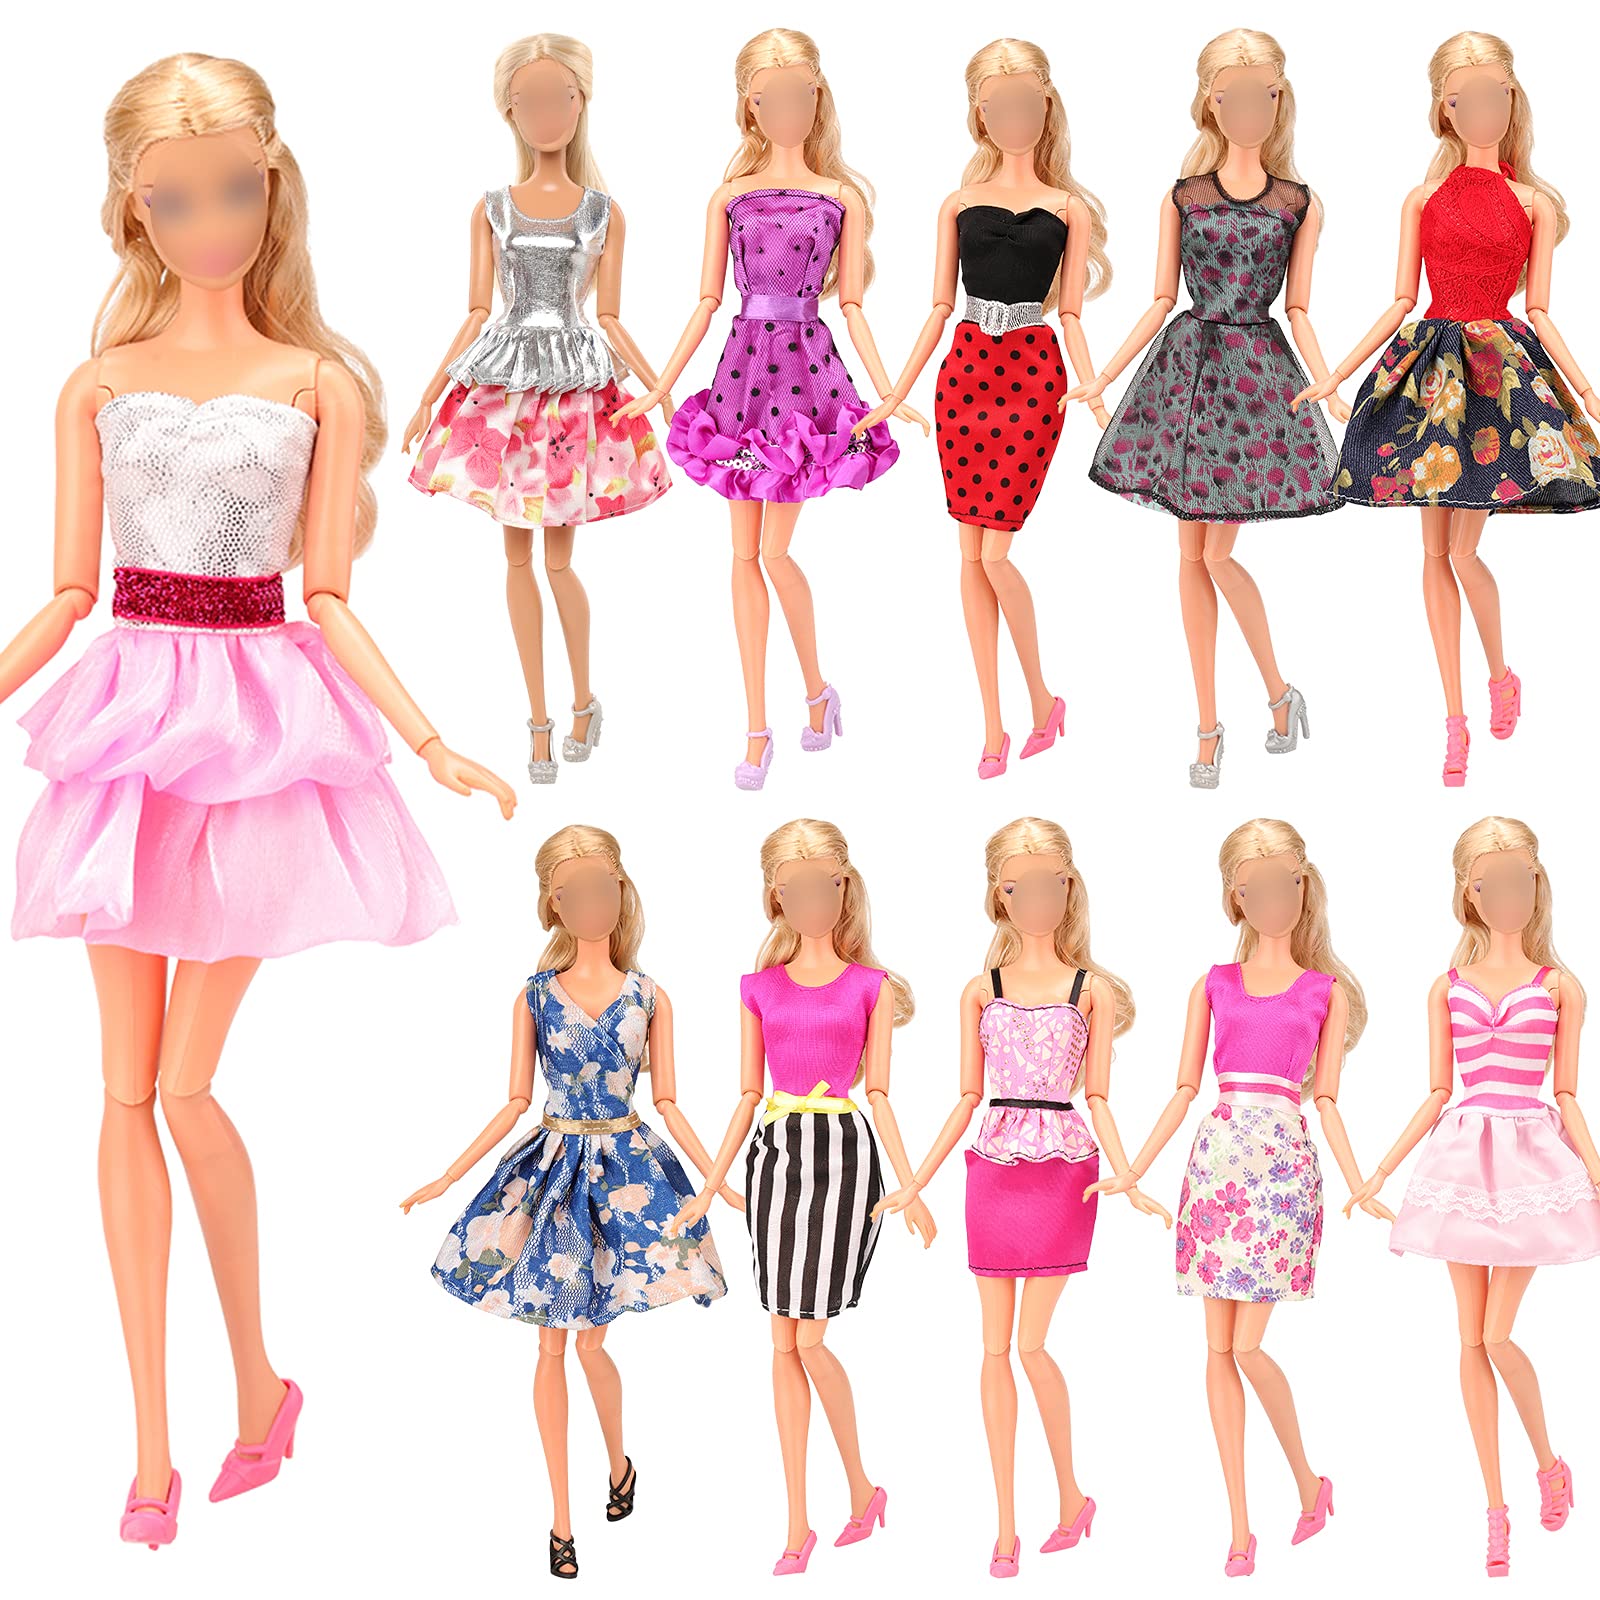 Barwa Lot 36 Items 3 Sets Fashion Dresses 3 Set Casual Tops and Pants 6 Pcs Mini Dresses with 1 Bags 10 Shoes, 13 Accessories for 11.5 Inch Girl Doll Birthday Xmas